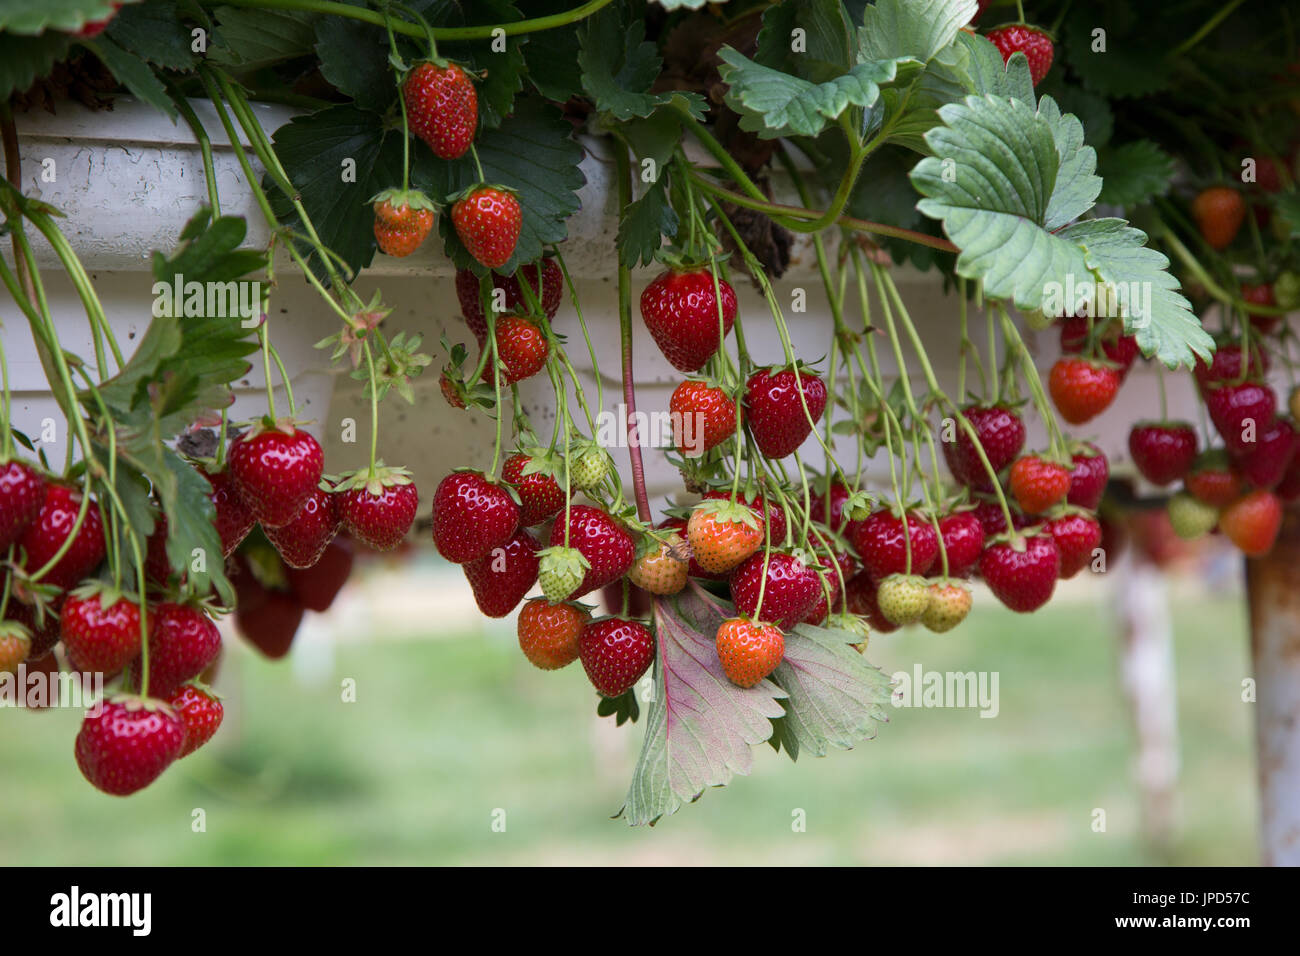 Strawberries ripe and ready to be picked, growing in a farm at Enfield Stock Photo